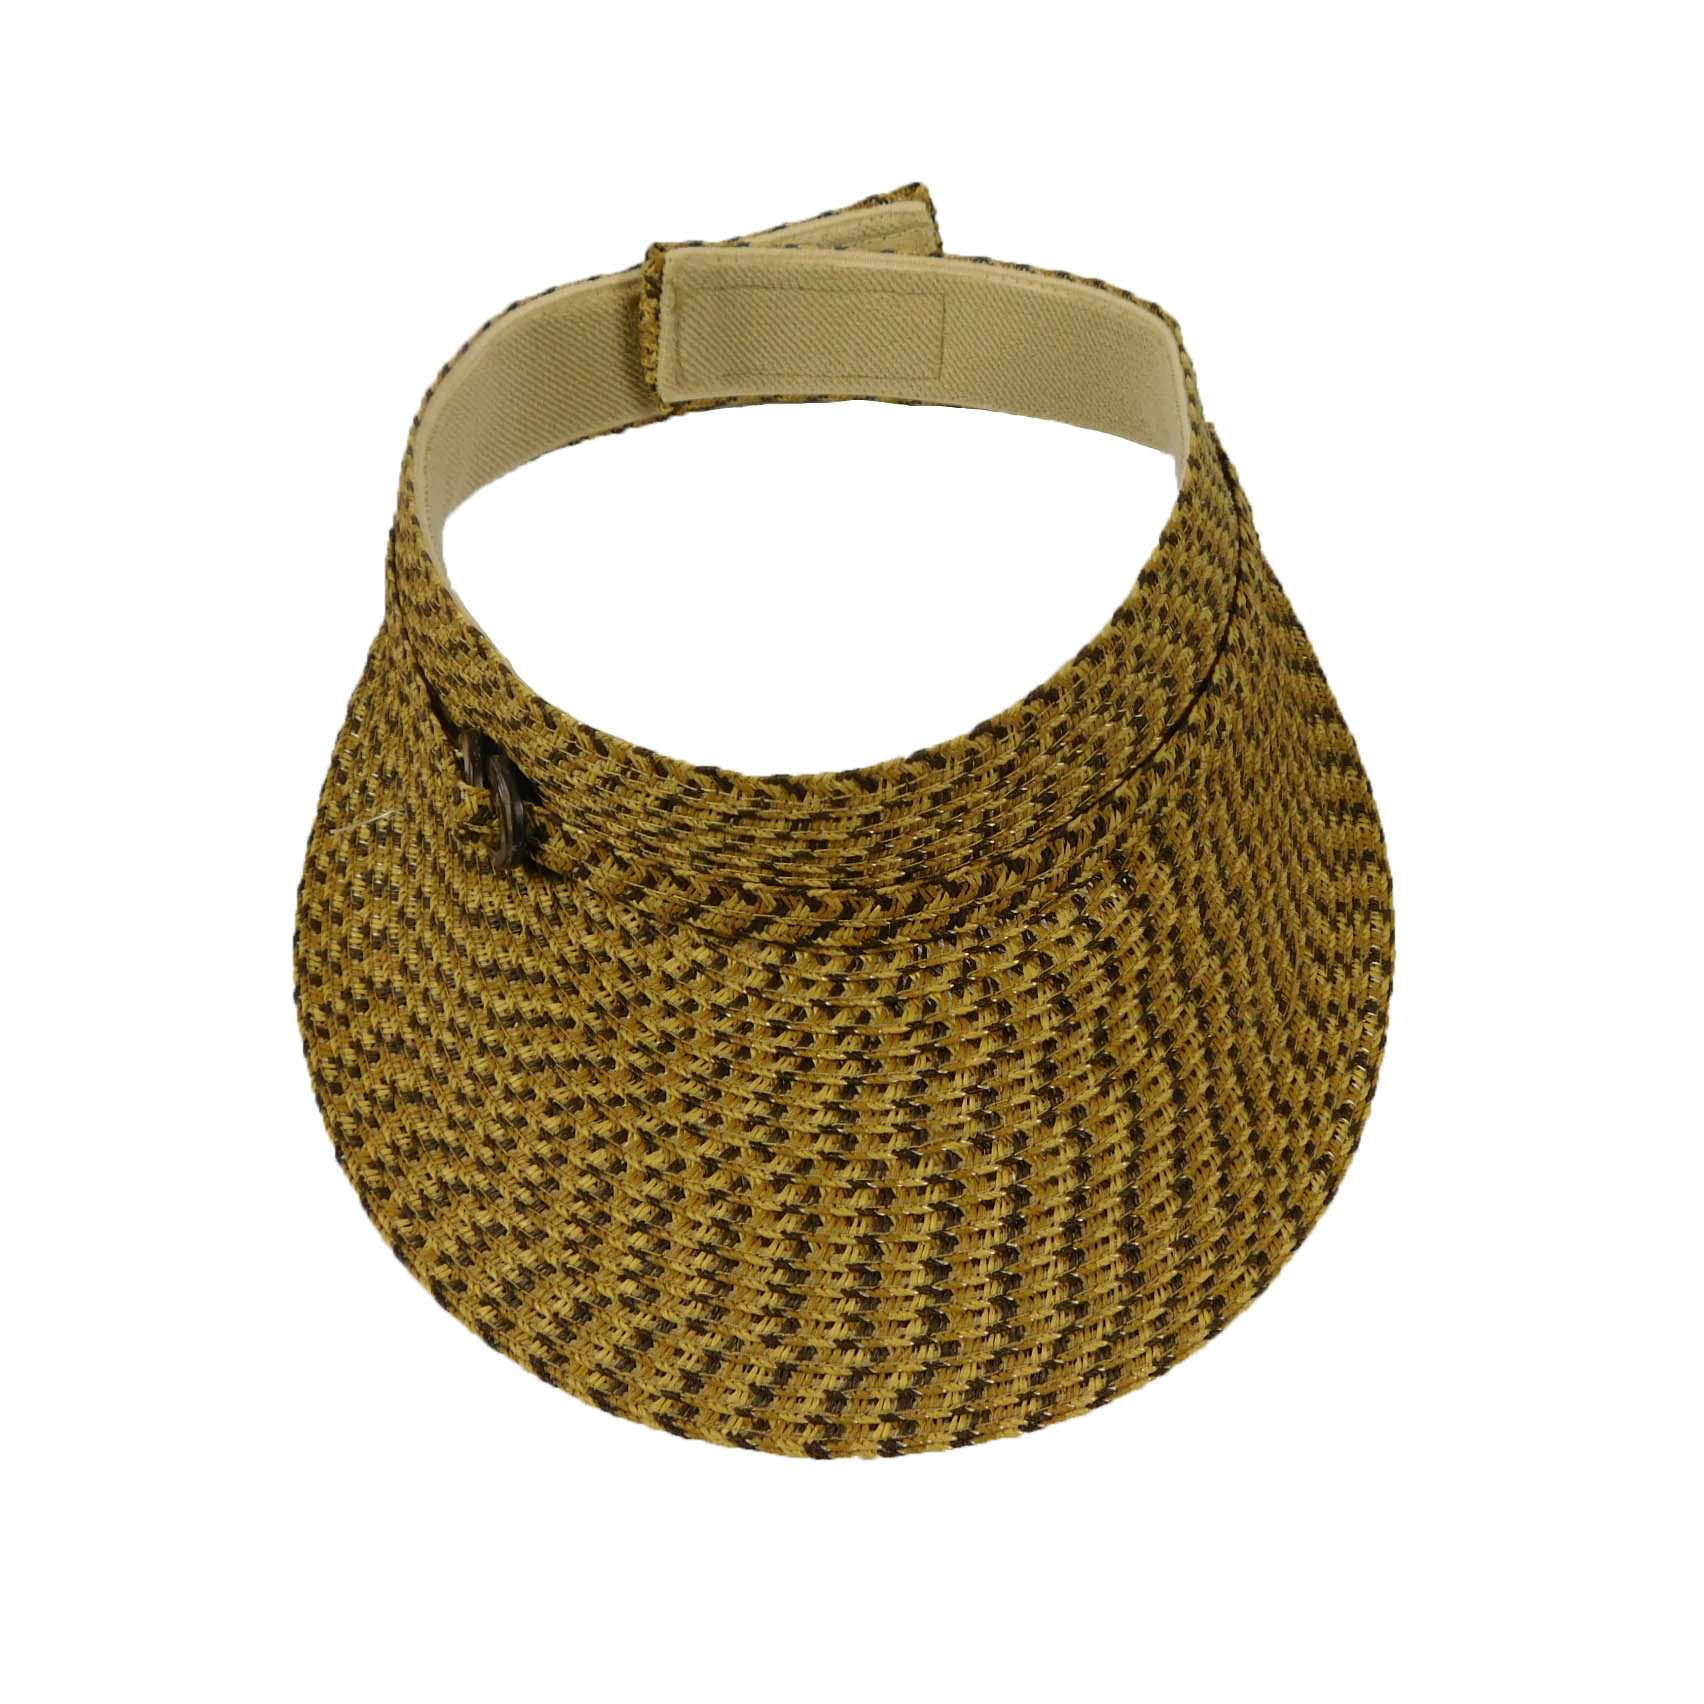 Straw Sun Visor with Belt Buckle Accent - Jeanne Simmons Accessories Visor Cap Jeanne Simmons    